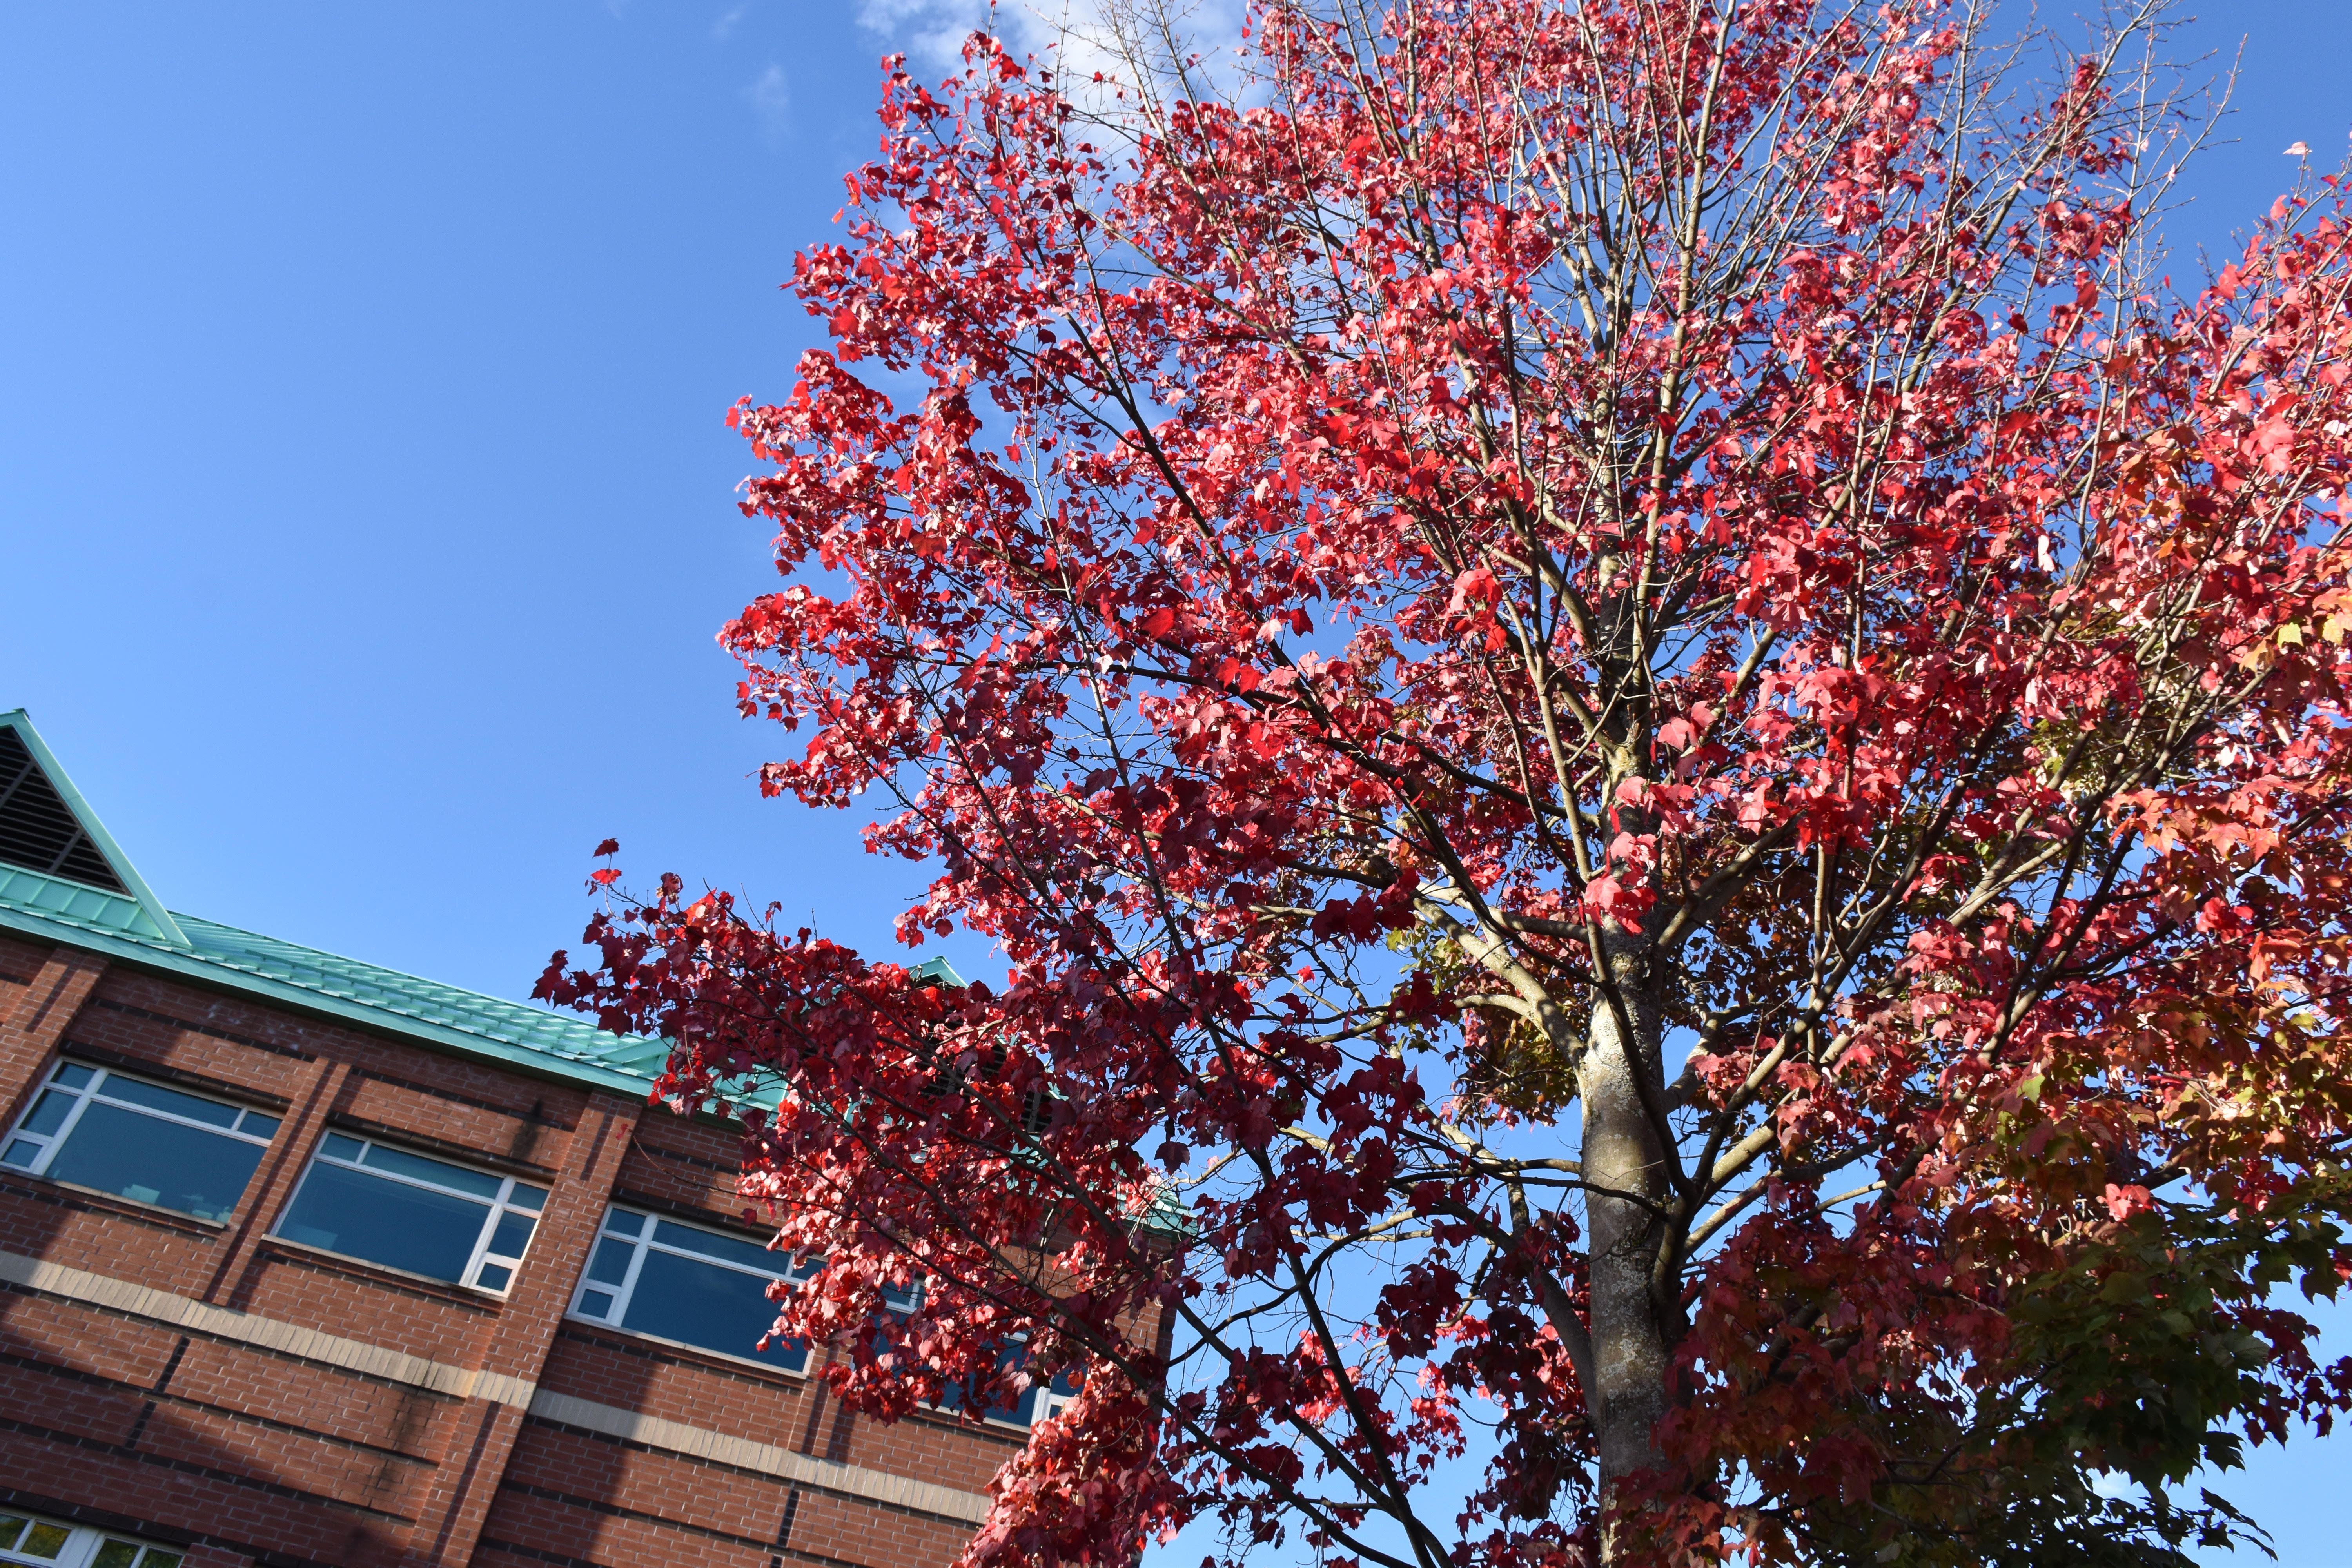 A tree with red leafs in front of a large brick building on a clear day.